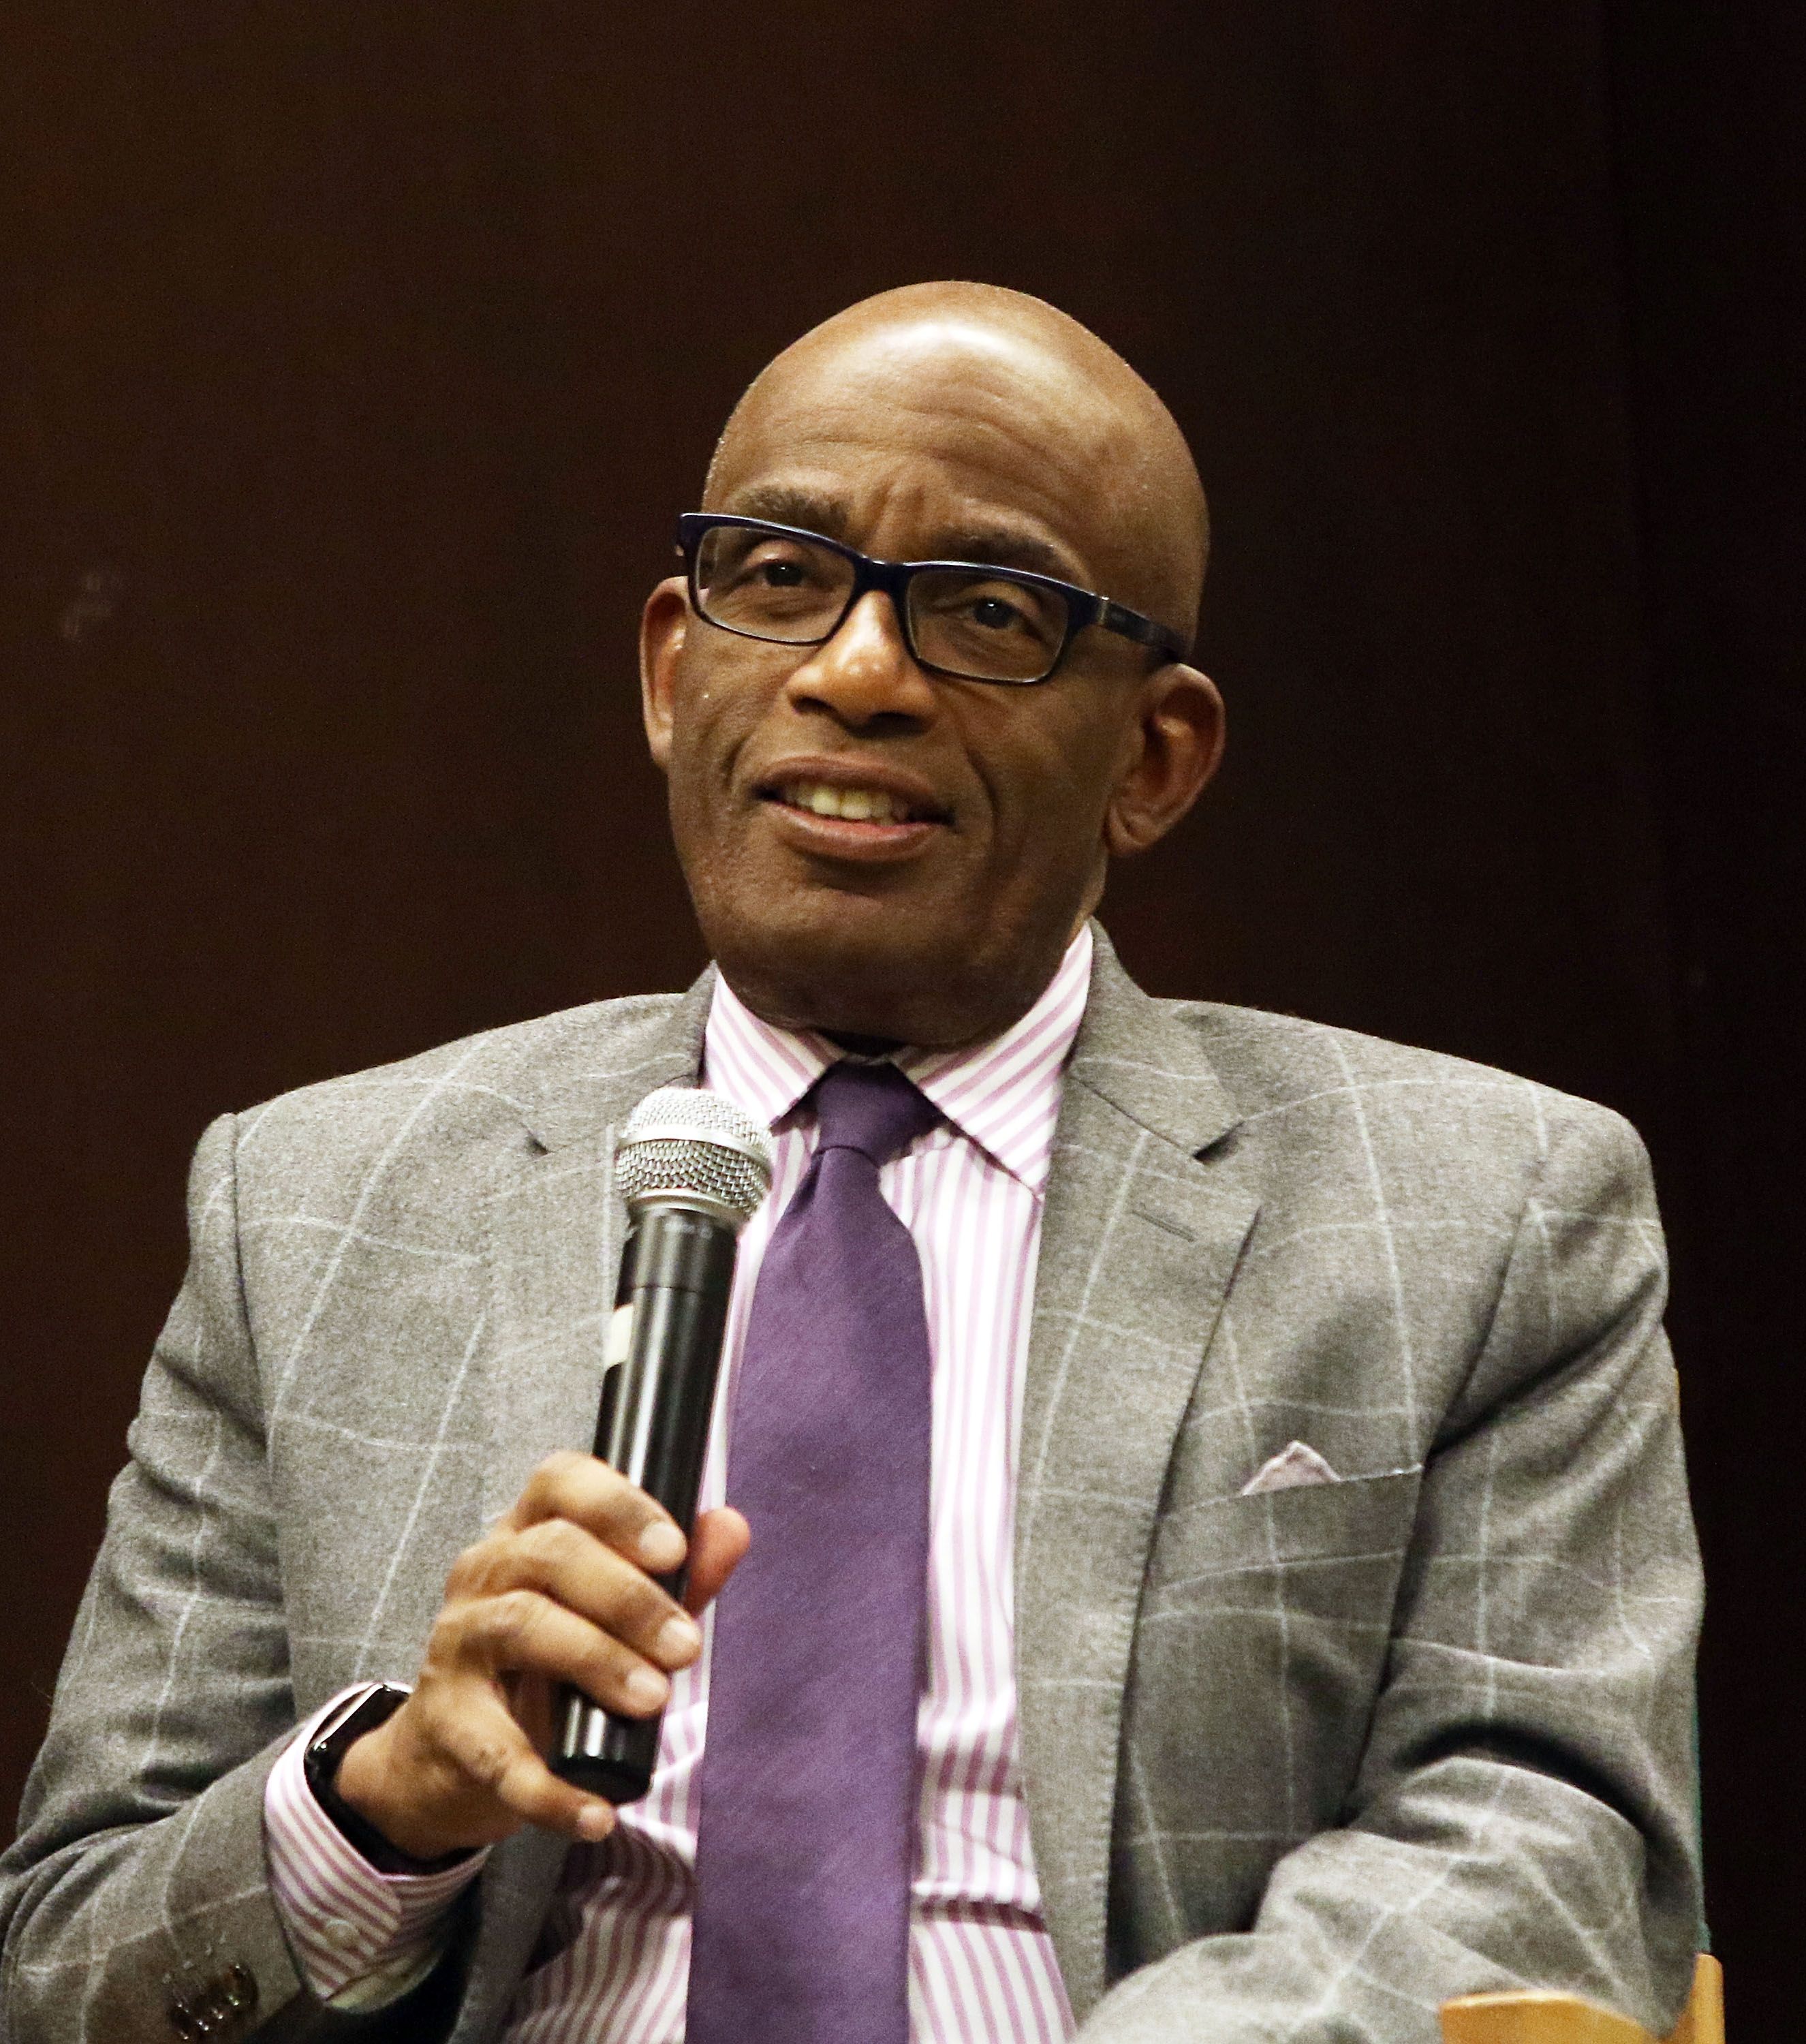 TV show presenter Al Roker promoting his book at Barnes & Nobles in New York City in 2016. | Photo: Getty Images